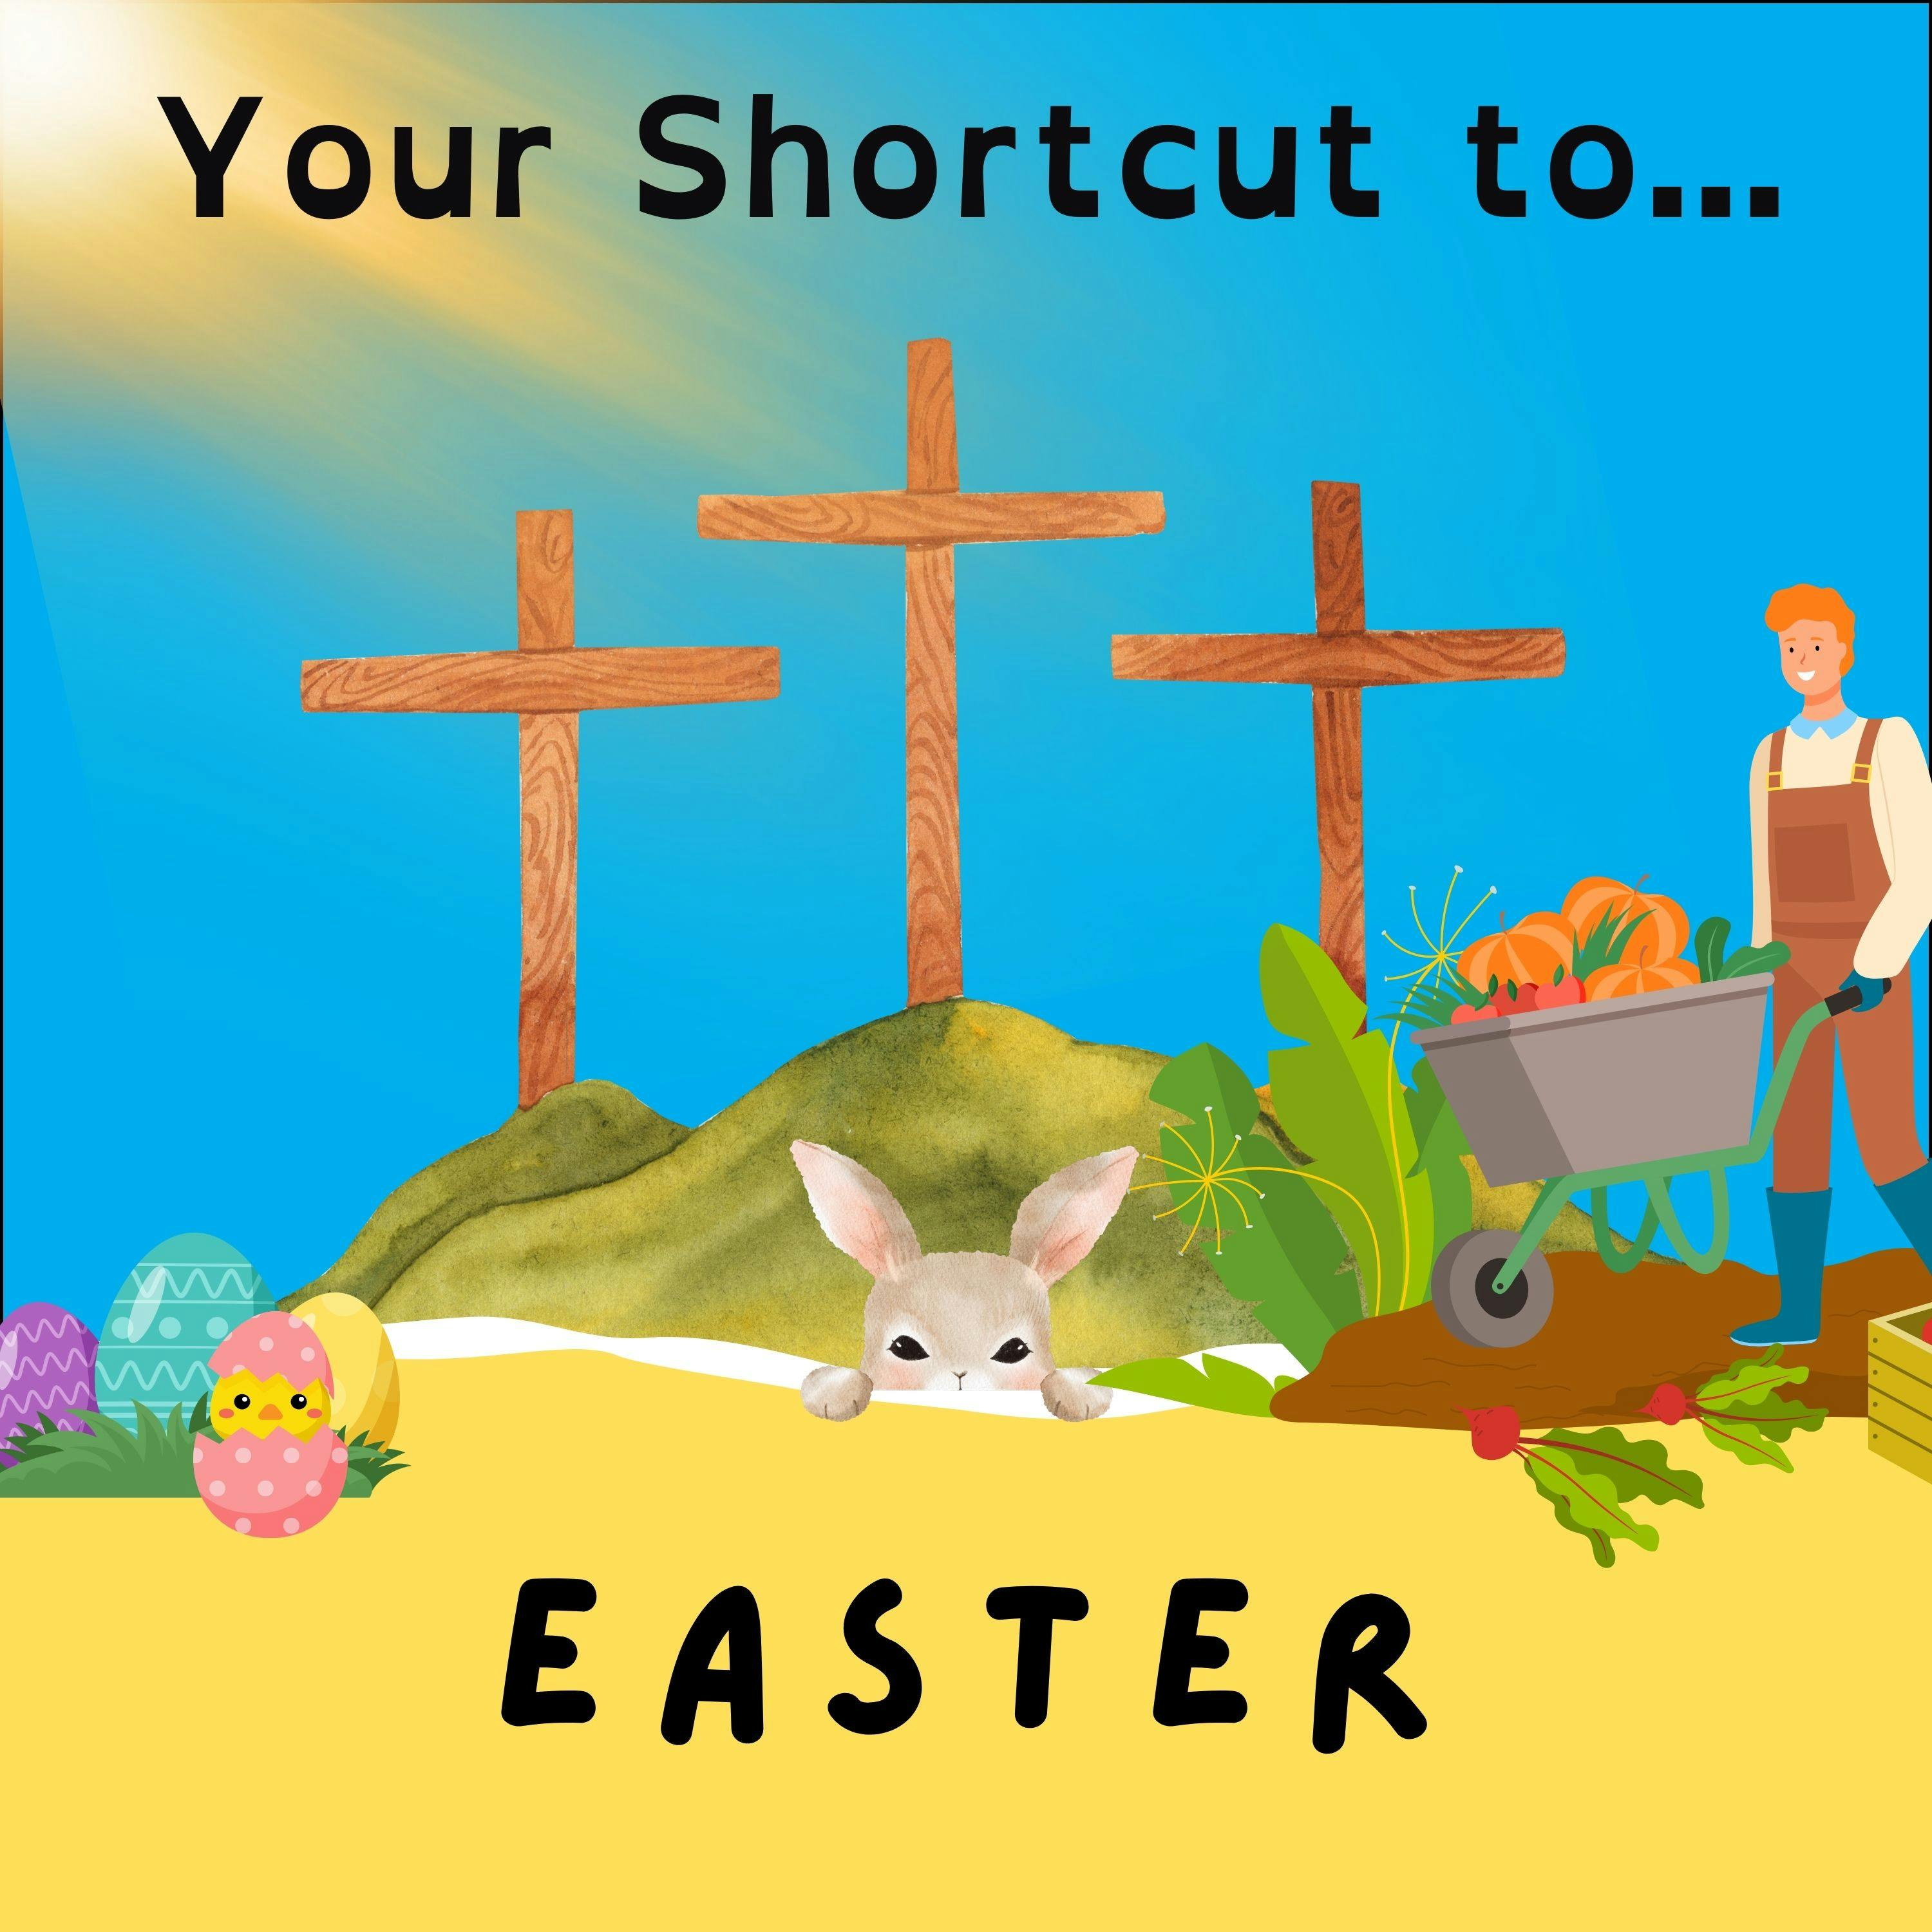 Your Shortcut to... Easter